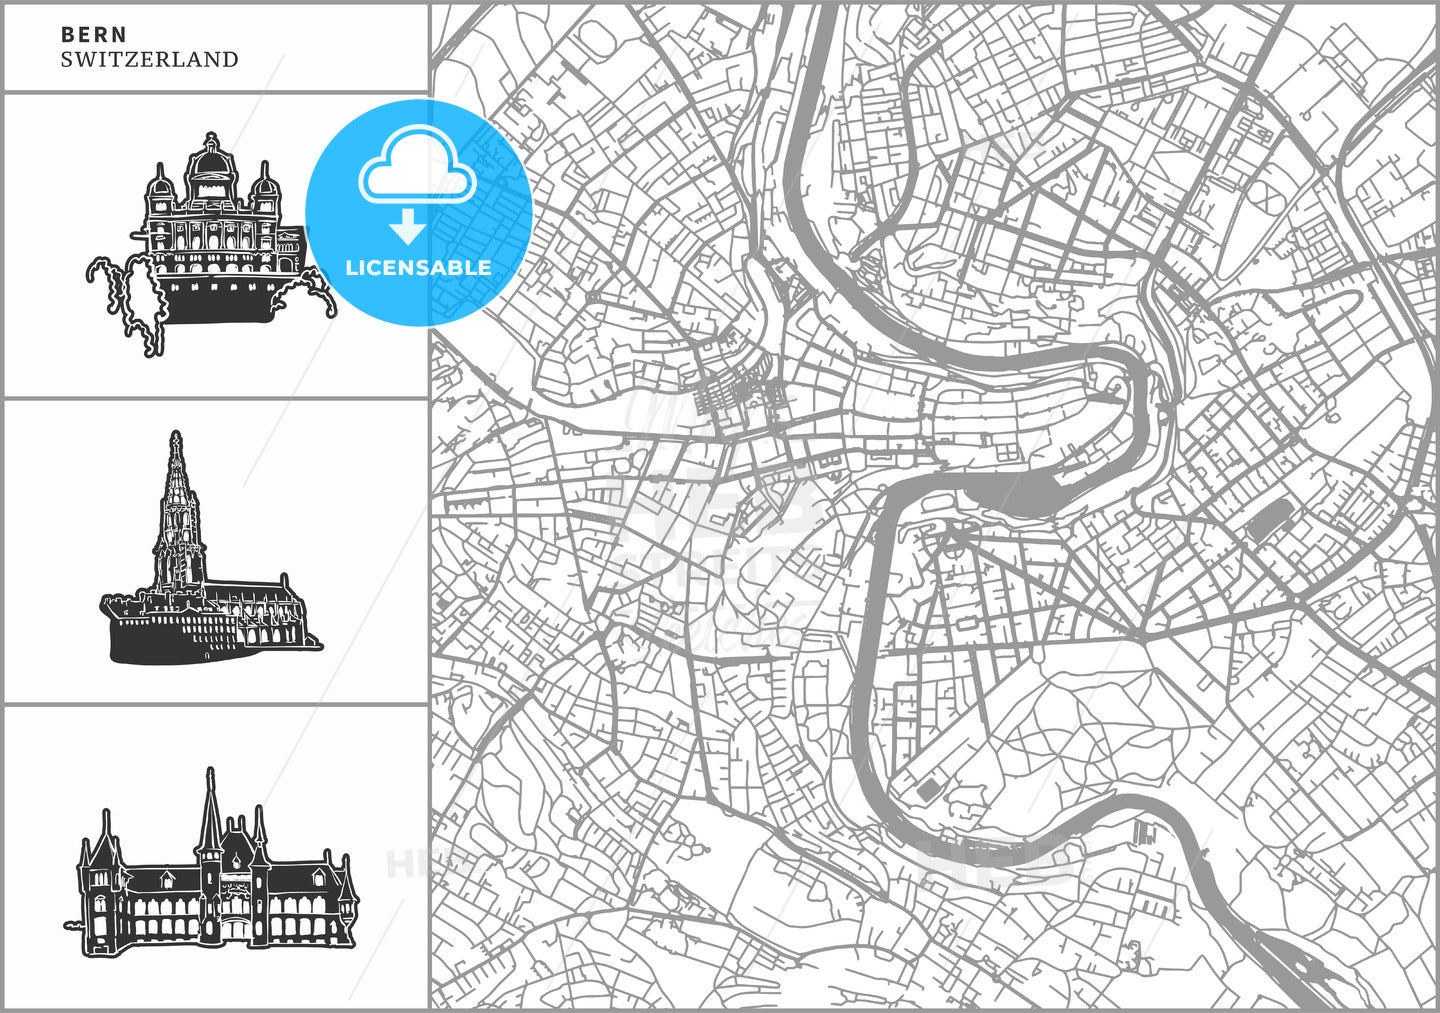 Bern city map with hand-drawn architecture icons